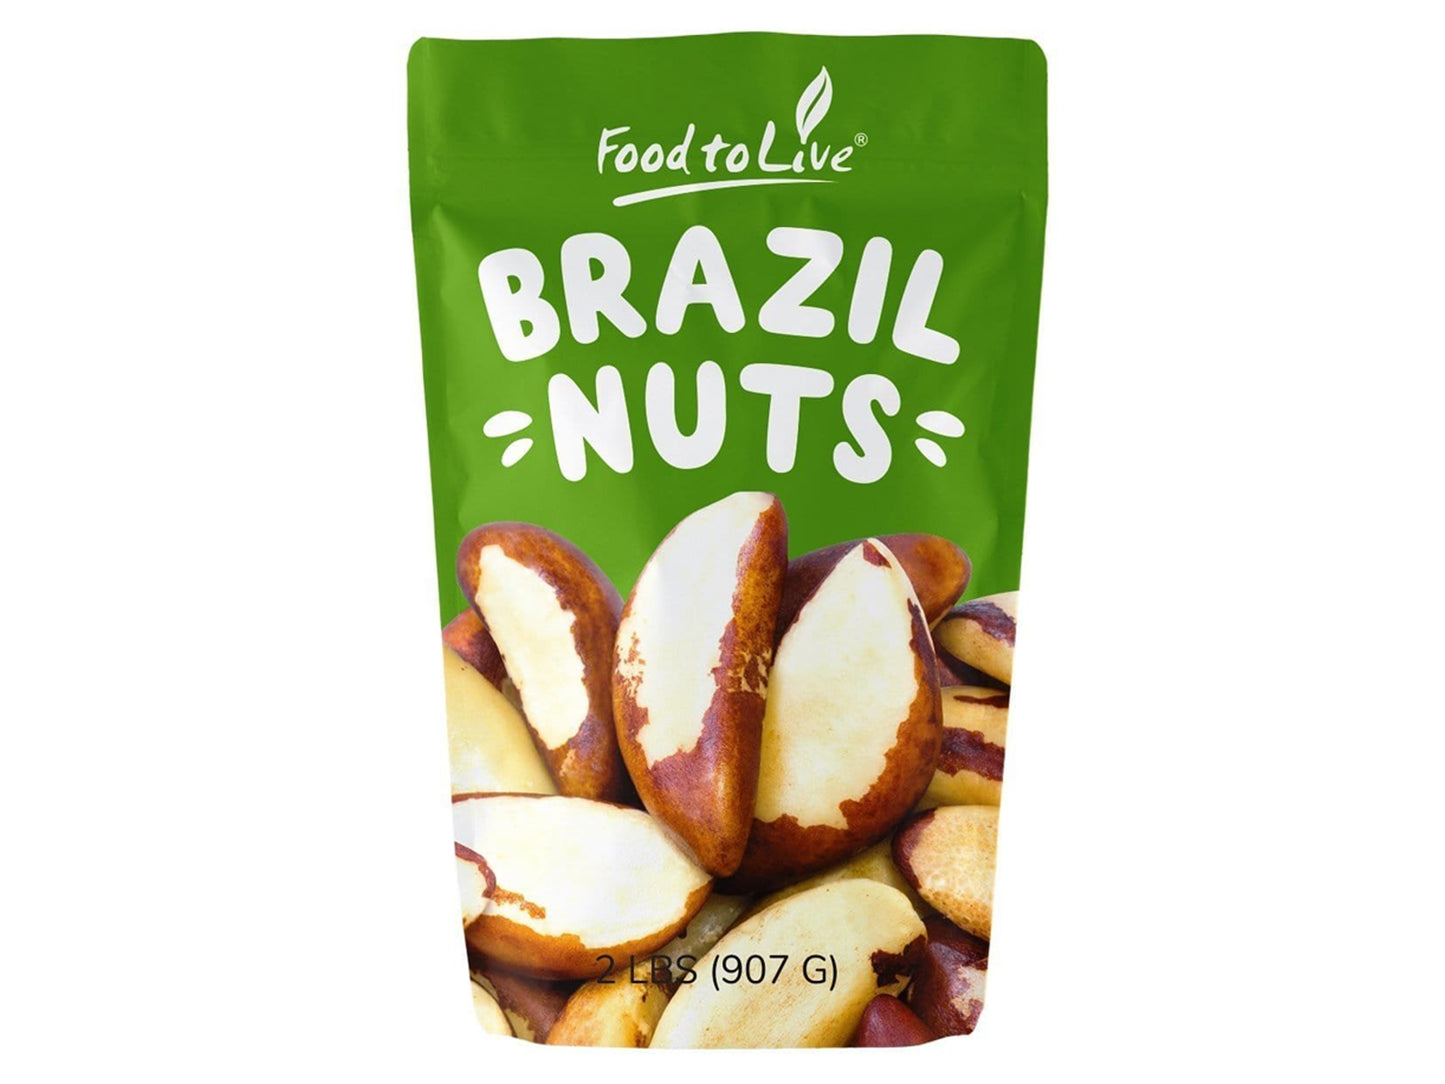 Brazil Nuts — Non-GMO Verified, Raw, Whole, No Shell, Unsalted, Kosher, Vegan, Keto, Paleo Friendly, Bulk, Good Source of Selenium, Low Sodium and Low Carb Food, Great Trail Mix Snack